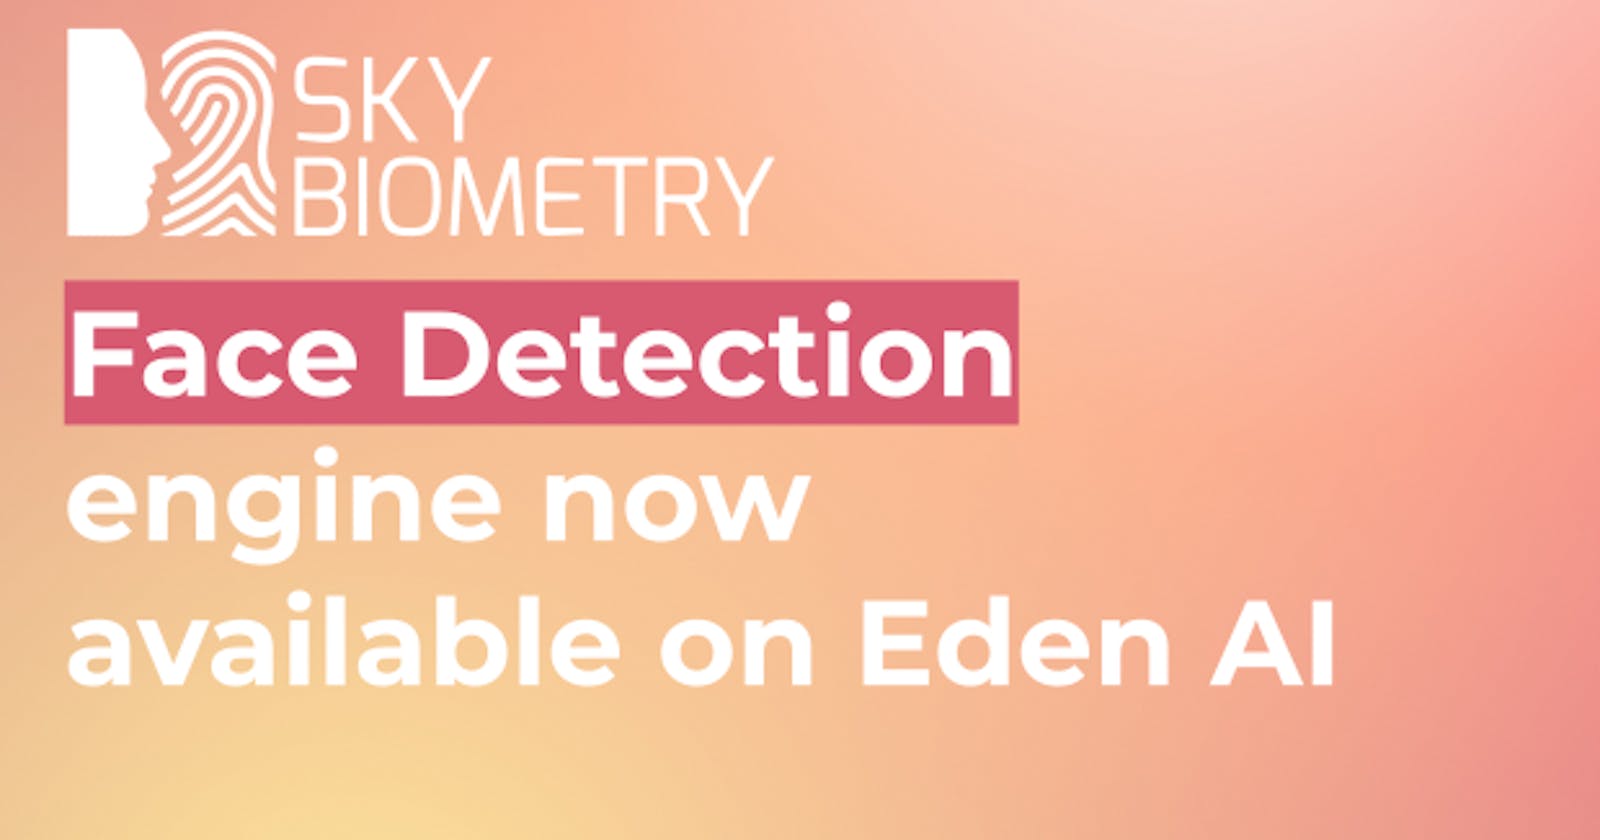 SkyBiometry face detection API available on Eden AI